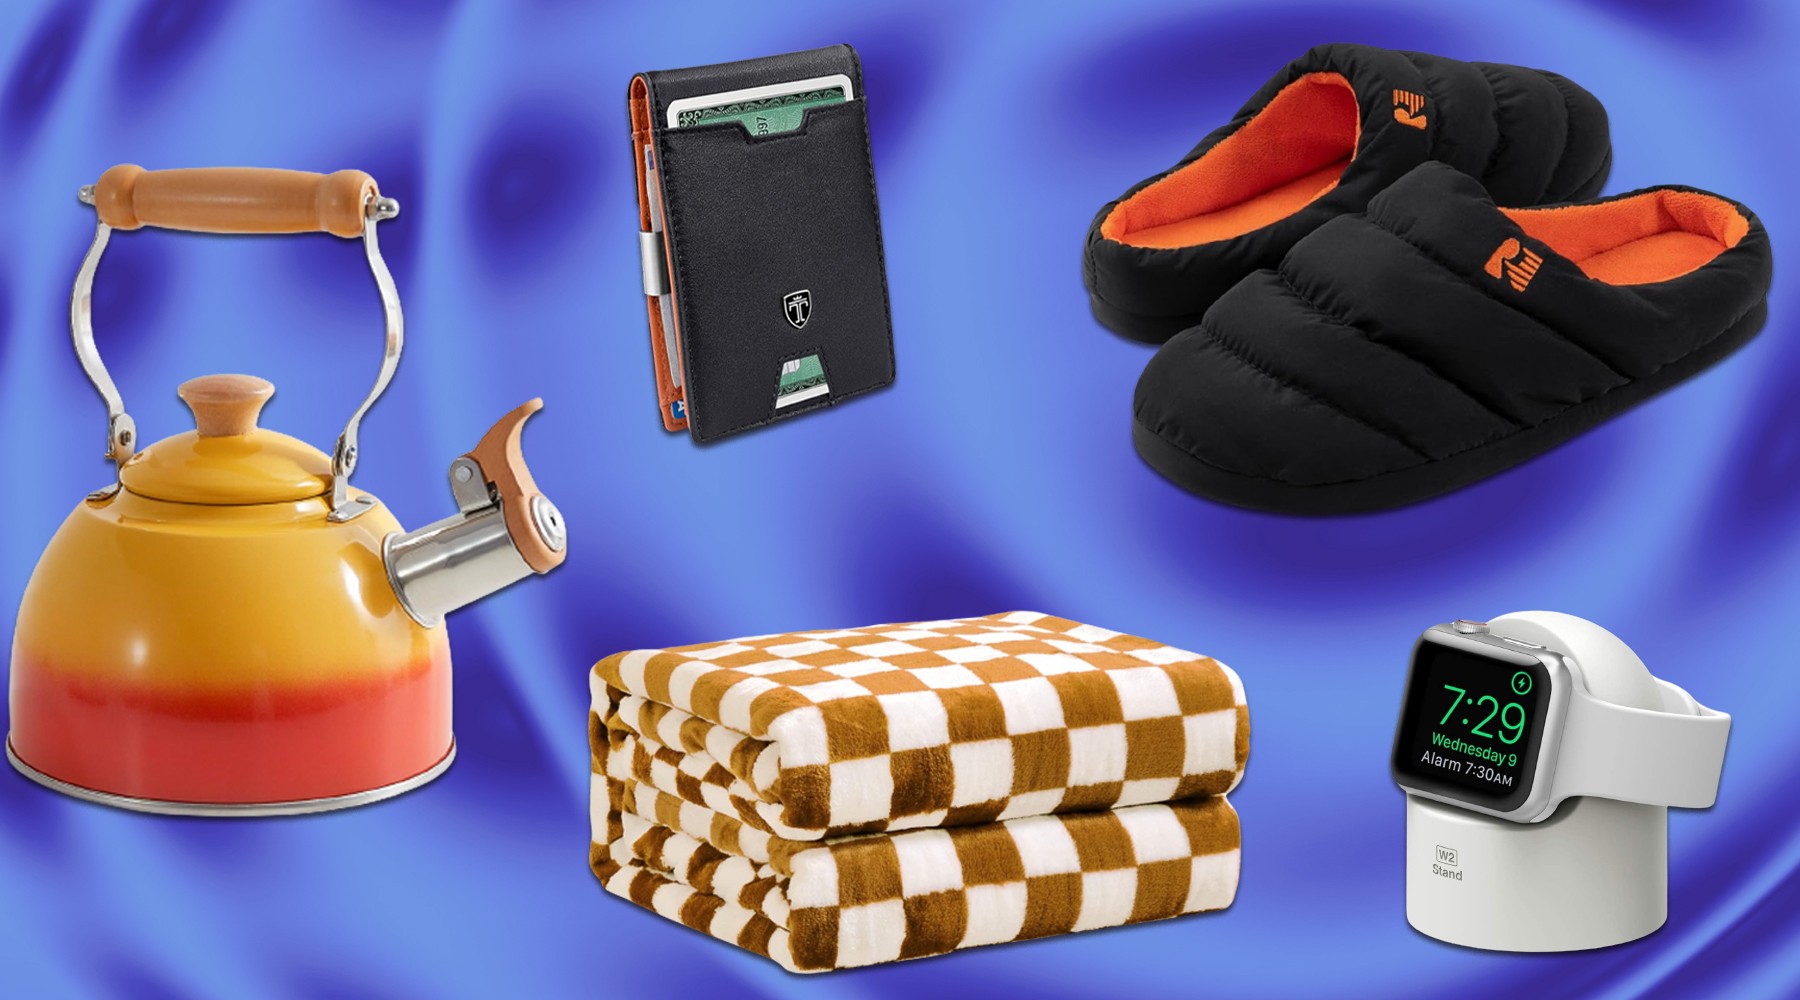 12+ Stocking Stuffer Ideas for Him Under $25: A Small Gift Guide for Men